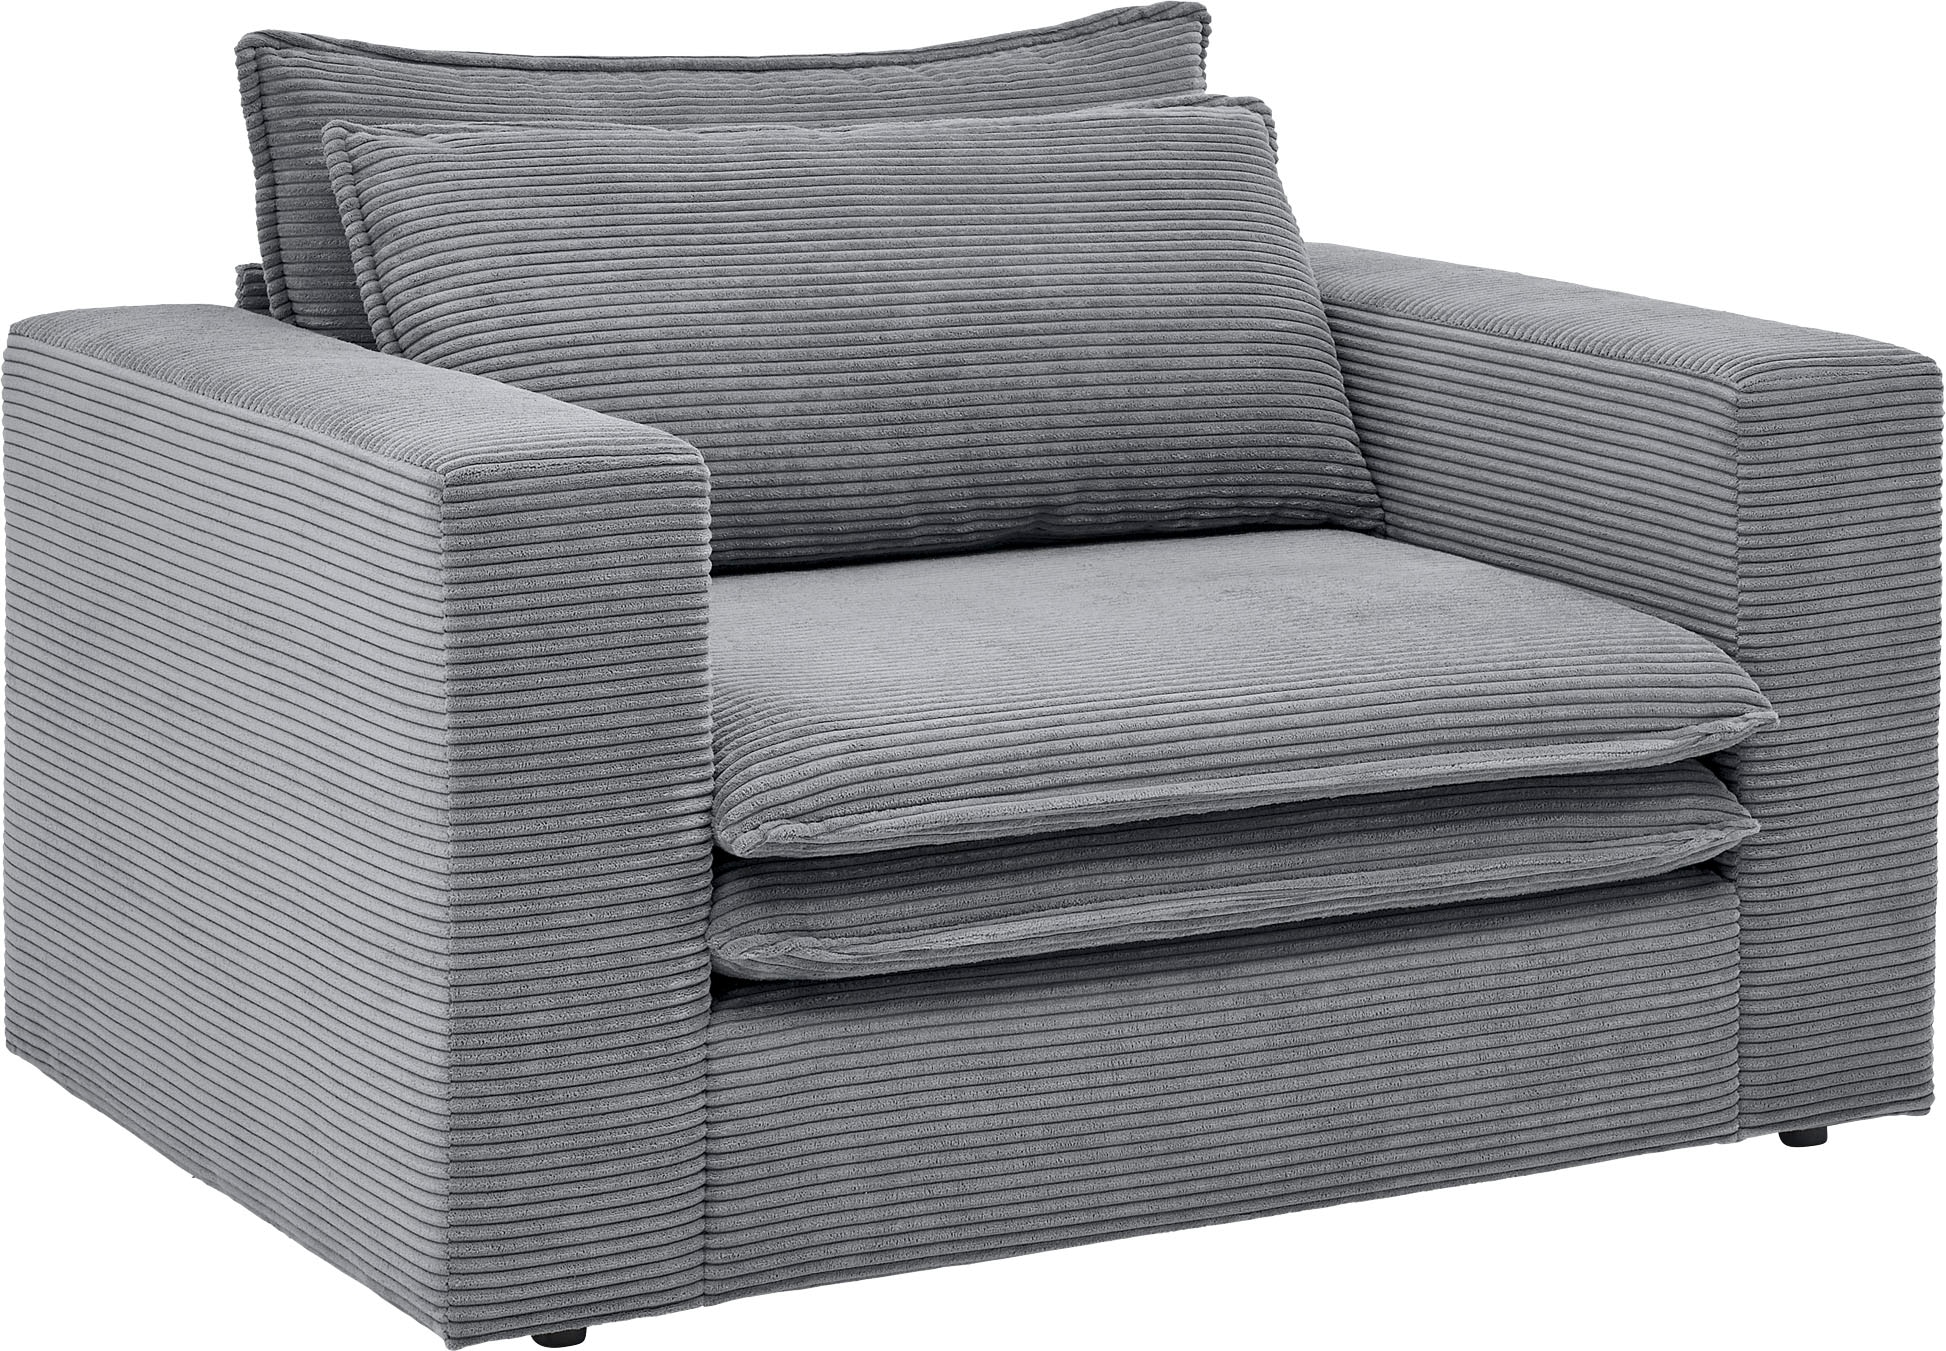 Places of Hochwertiger bei »PIAGGE«, Cord, Loveseat OTTO Style Loveseat trendiger